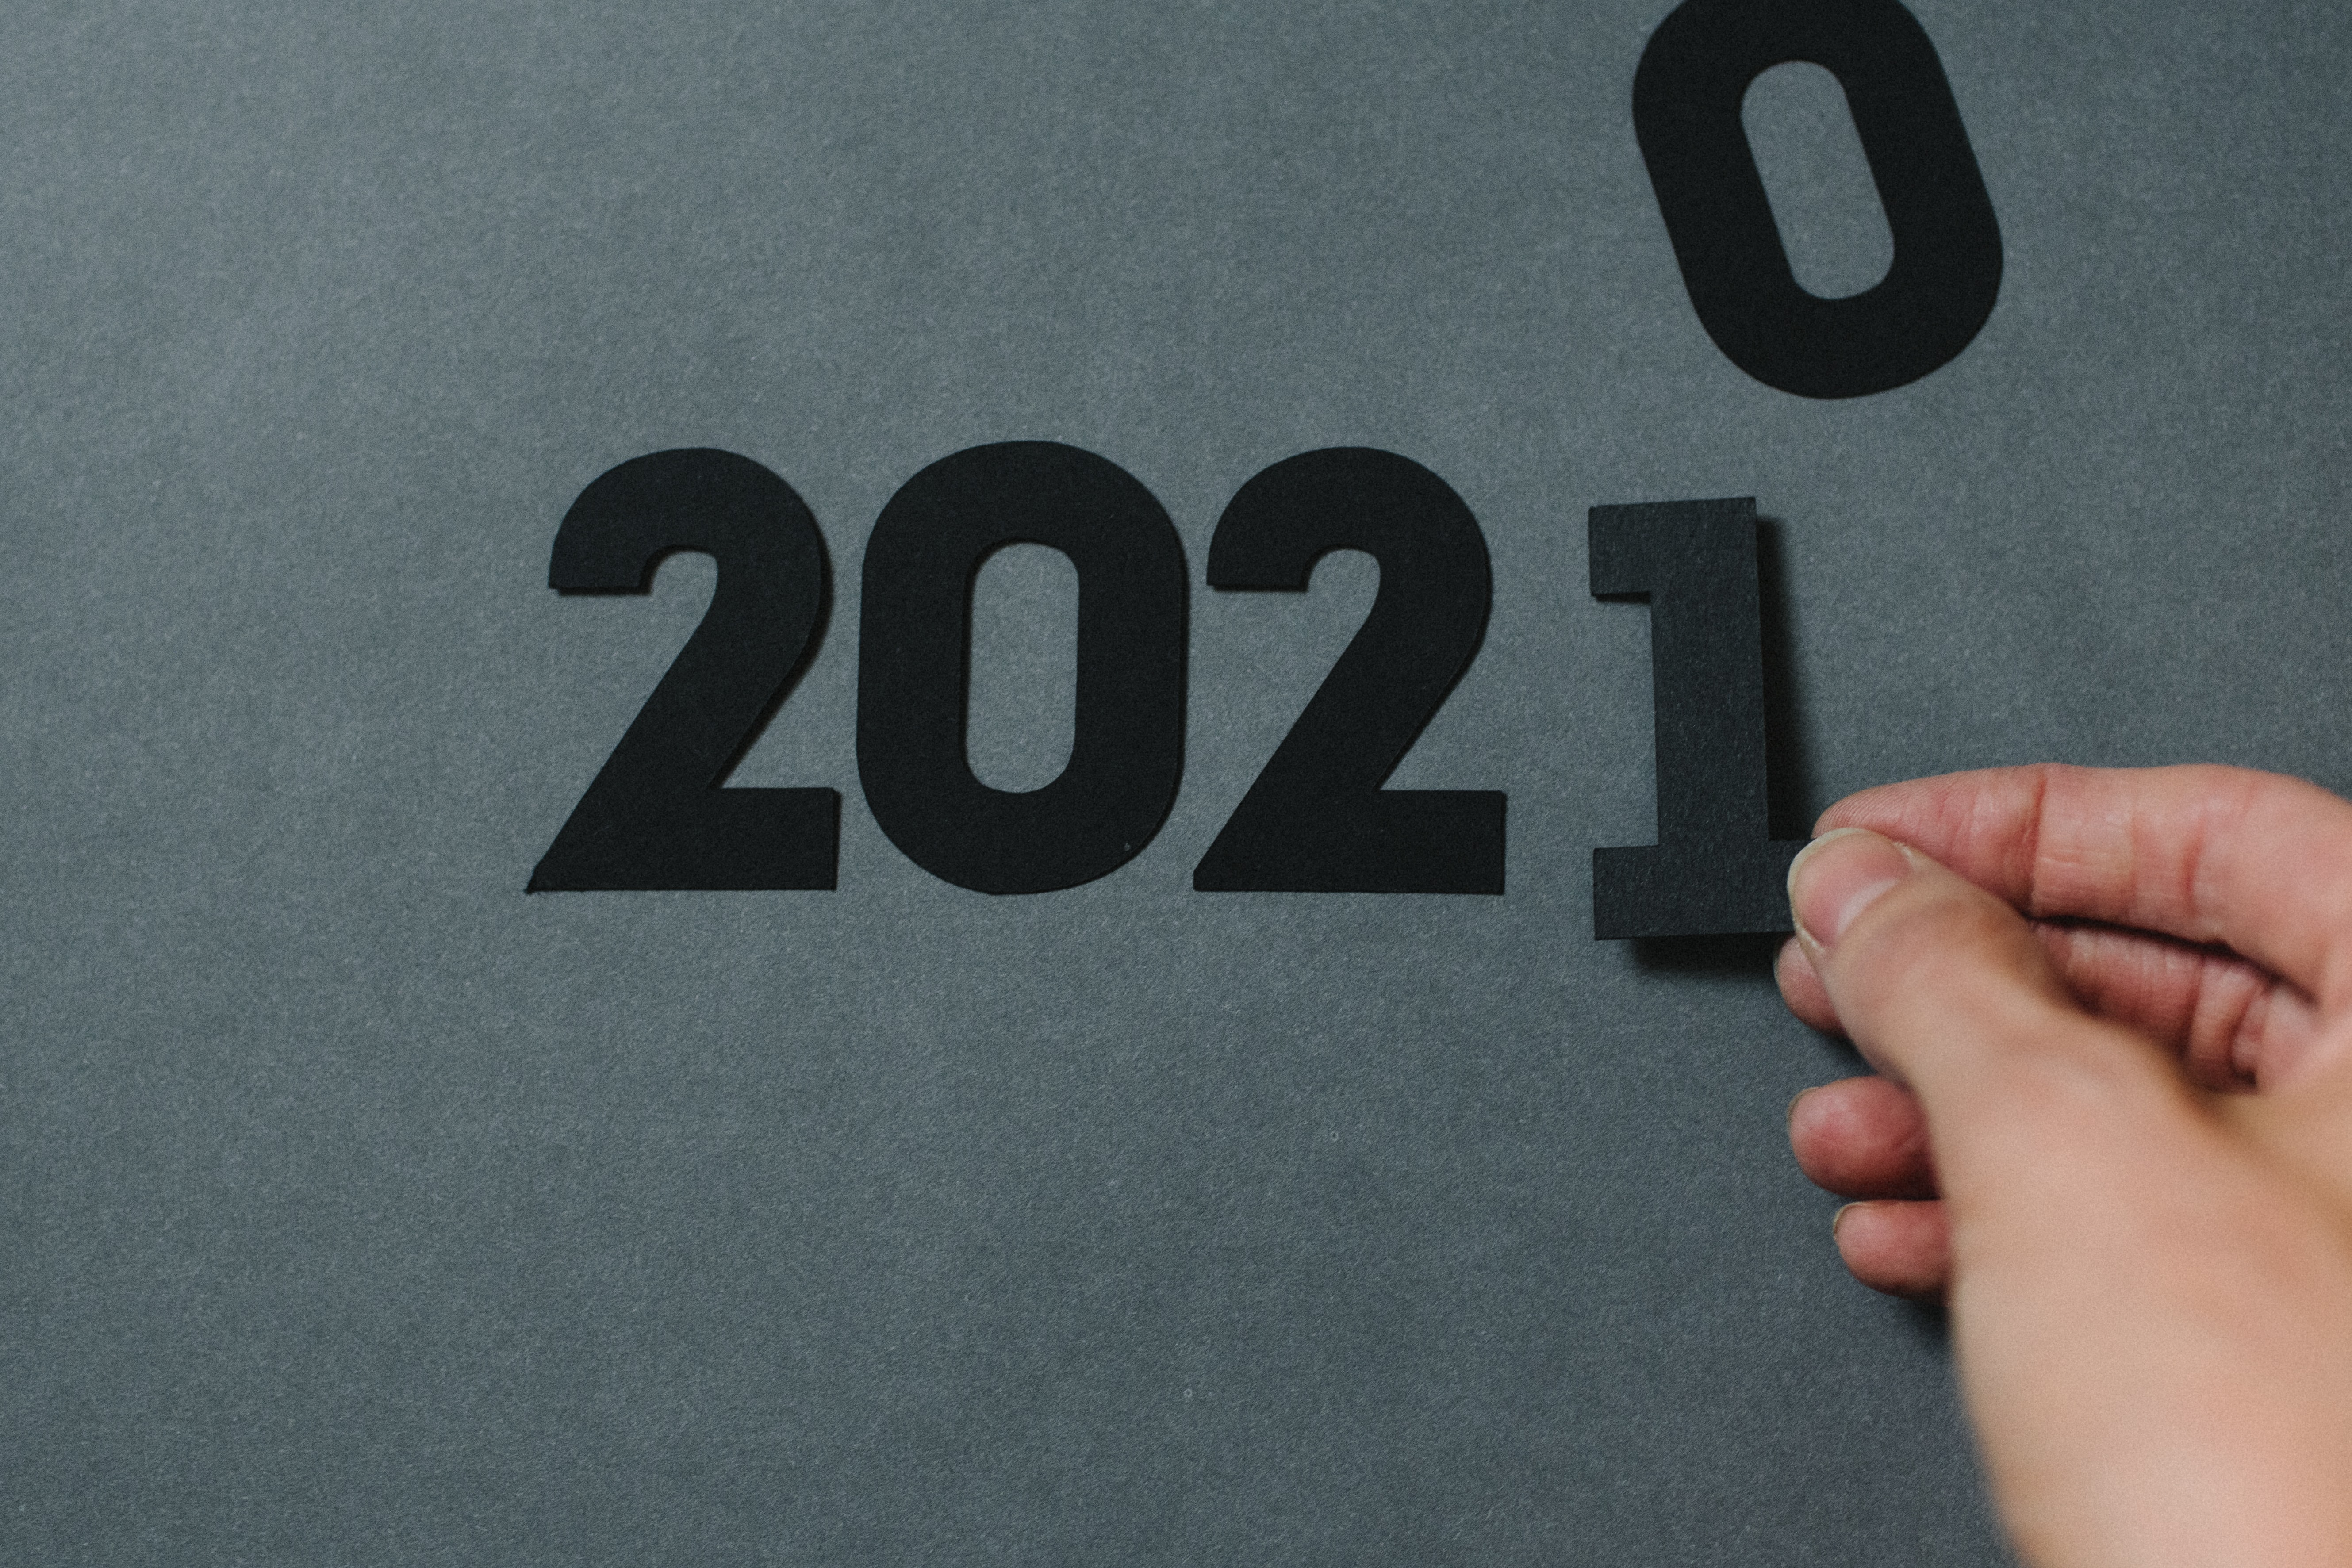 Here’s how to make 2021 your best growth year ever!